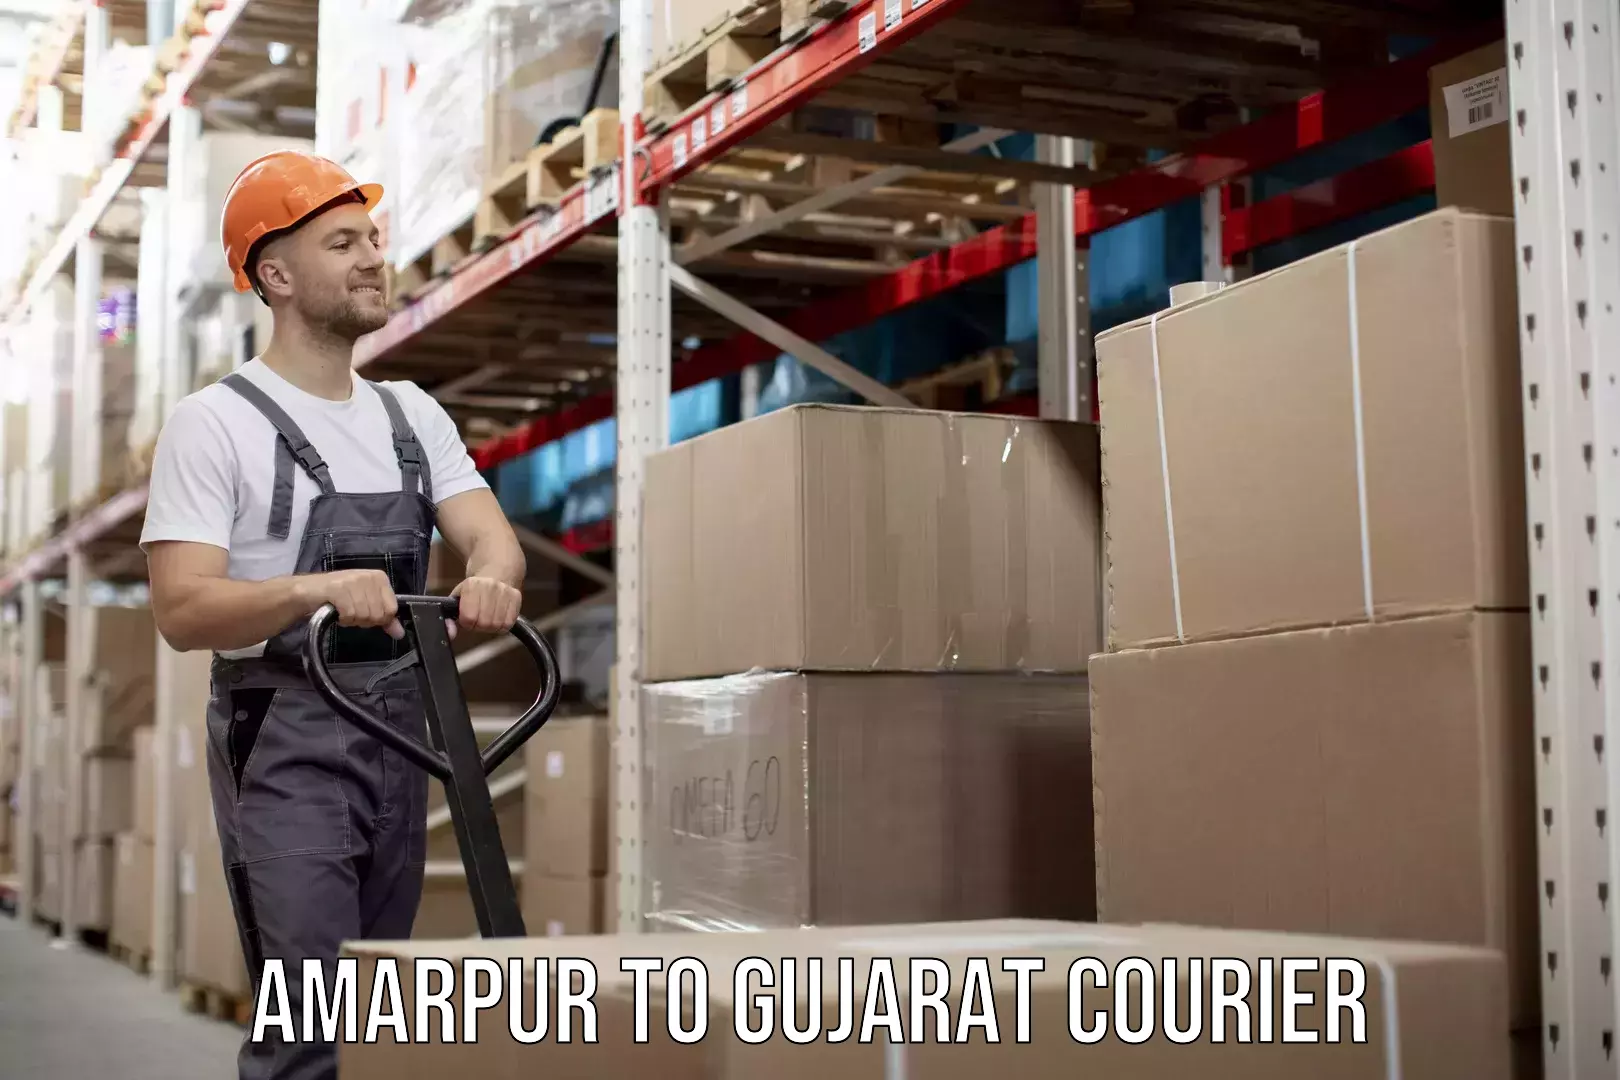 Express delivery capabilities Amarpur to Gujarat